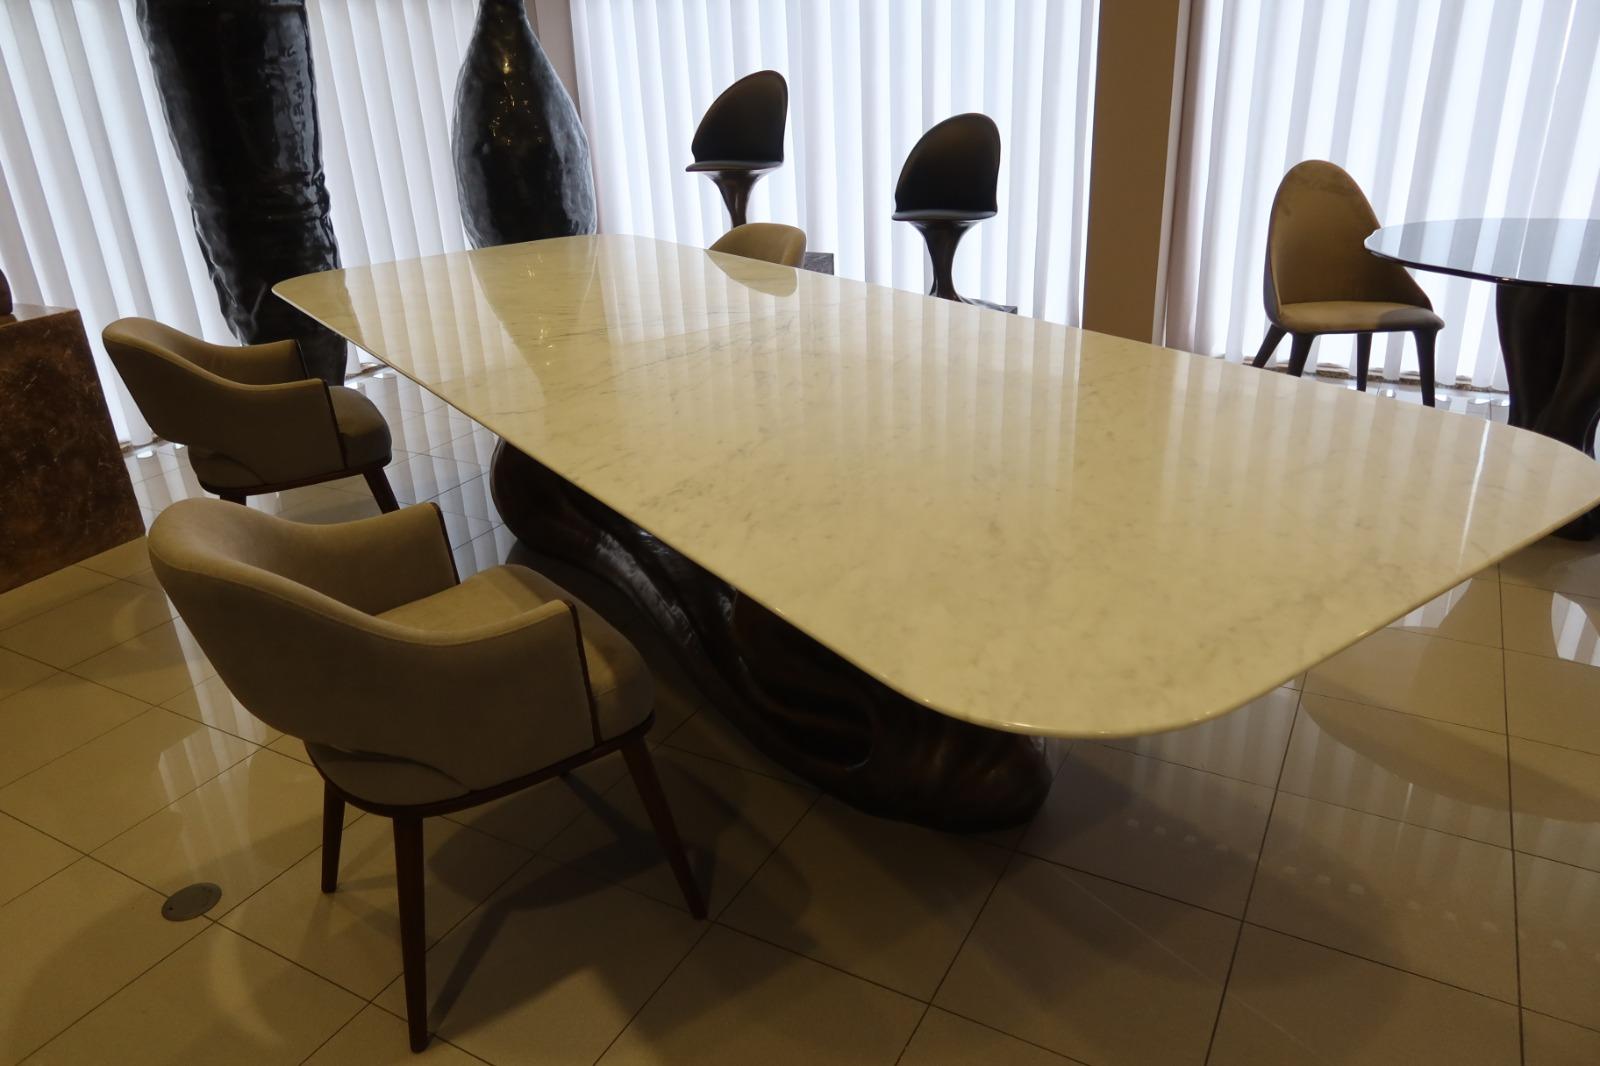 Dining table

General information

Dimensions (cm): 350 x 130 x 75
Dimensions (in): 118.1 x 51.2 x 29.5
Seats: 10 to 12

Materials and Colors

Top: Arabescato marble;
Base: Resin reinforced with fiberglass finished in brass color.

Super offer for